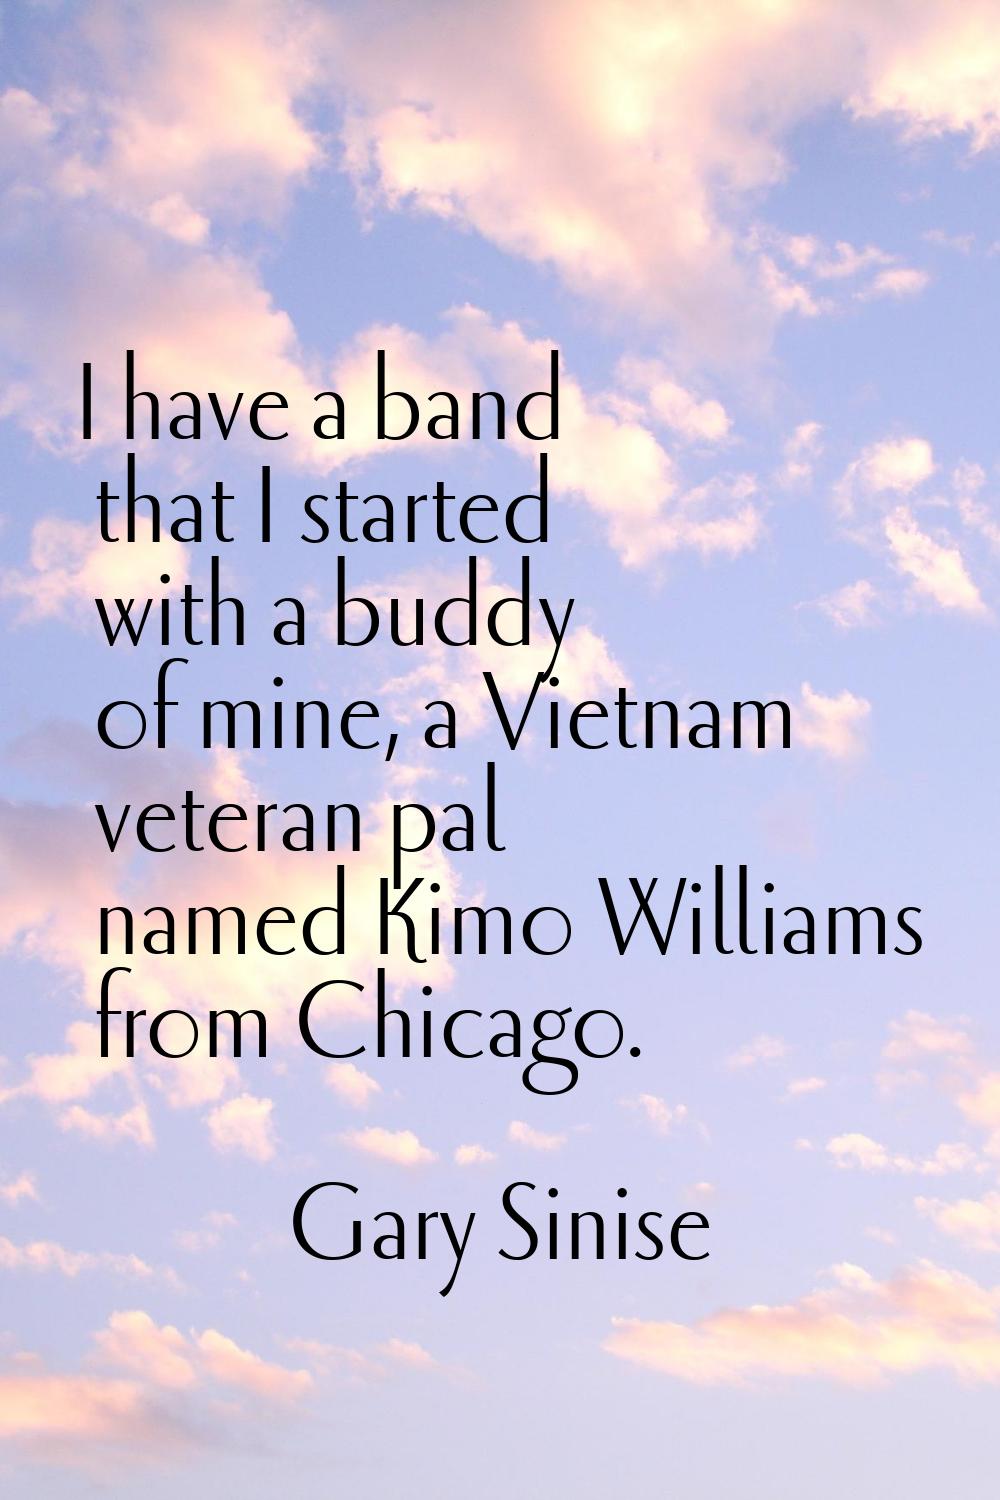 I have a band that I started with a buddy of mine, a Vietnam veteran pal named Kimo Williams from C